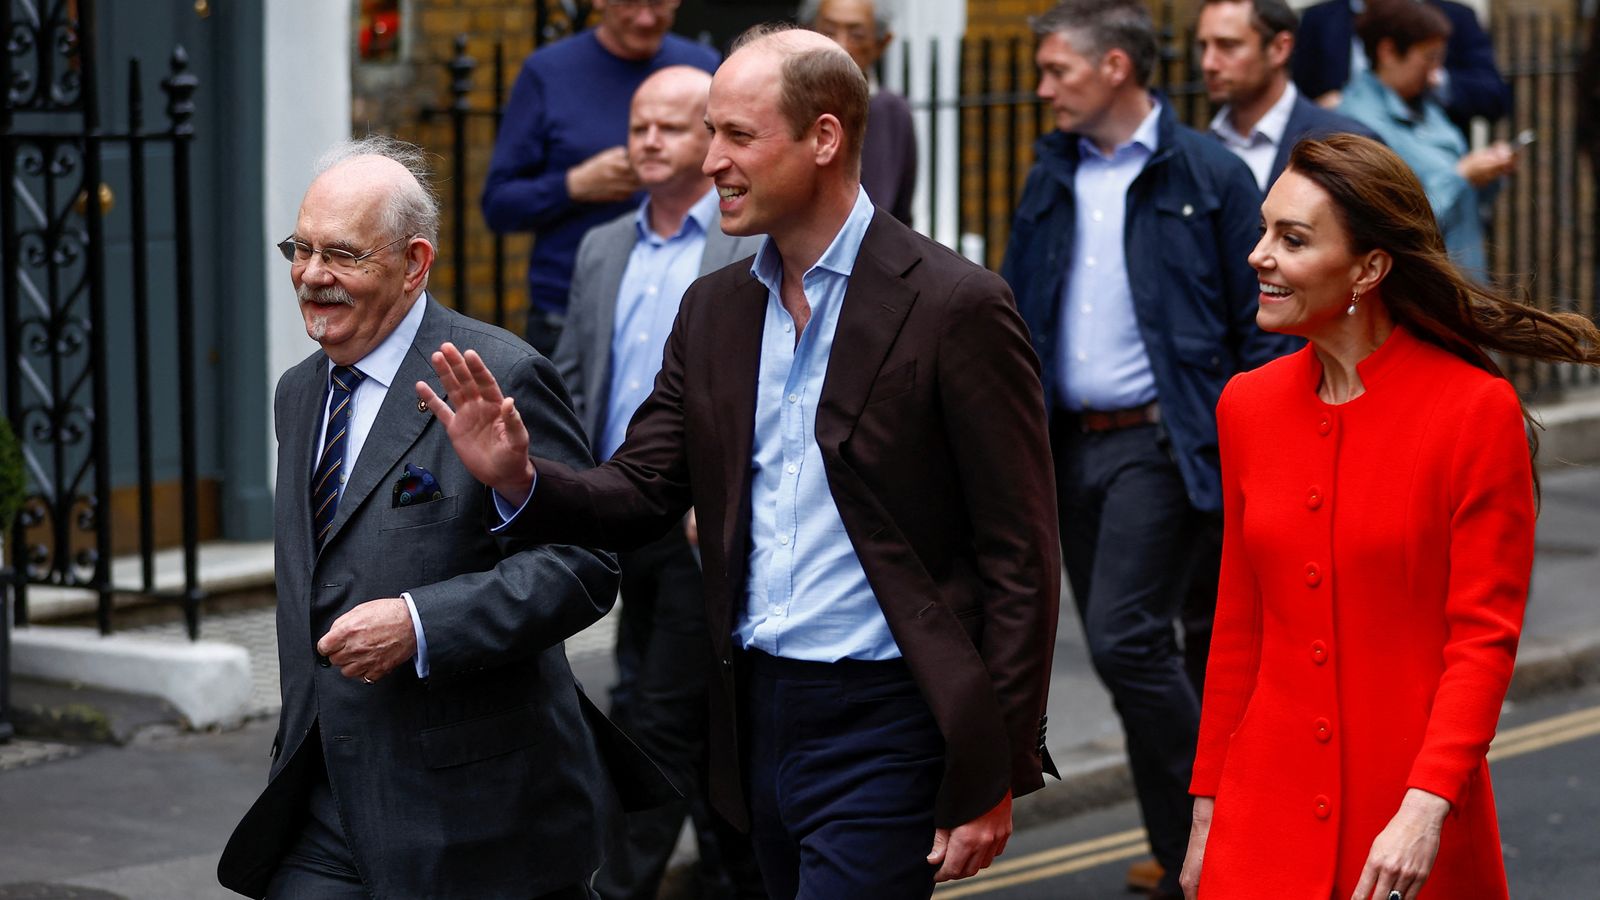 William and Kate meet fans in Soho after trip on the Tube